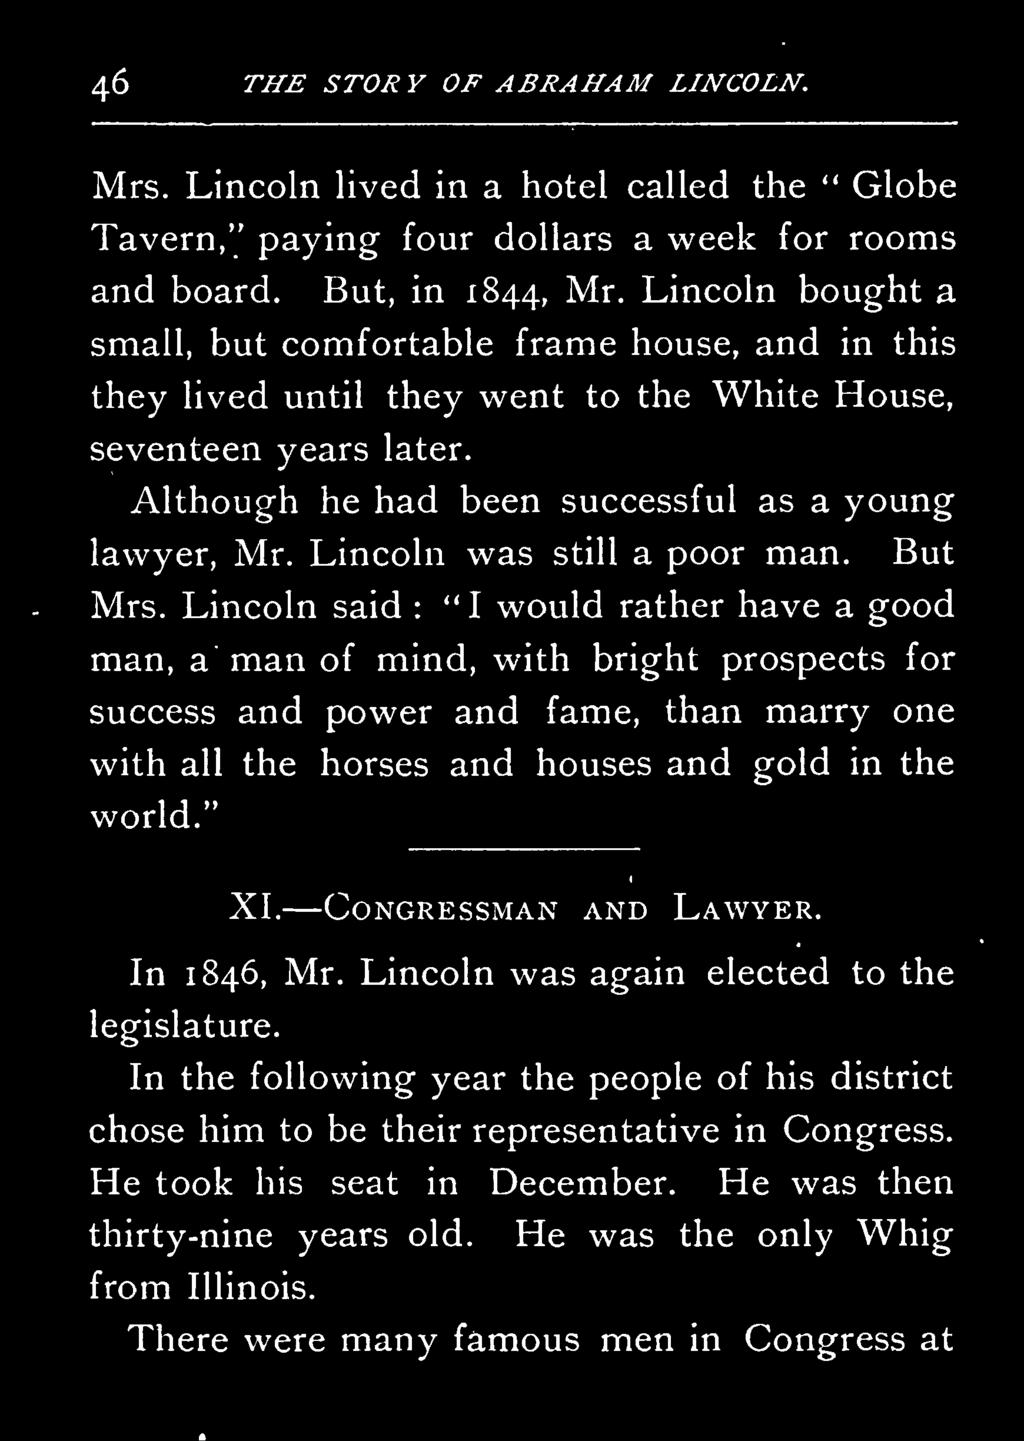 Lincoln was still a poor man. But " Mrs.